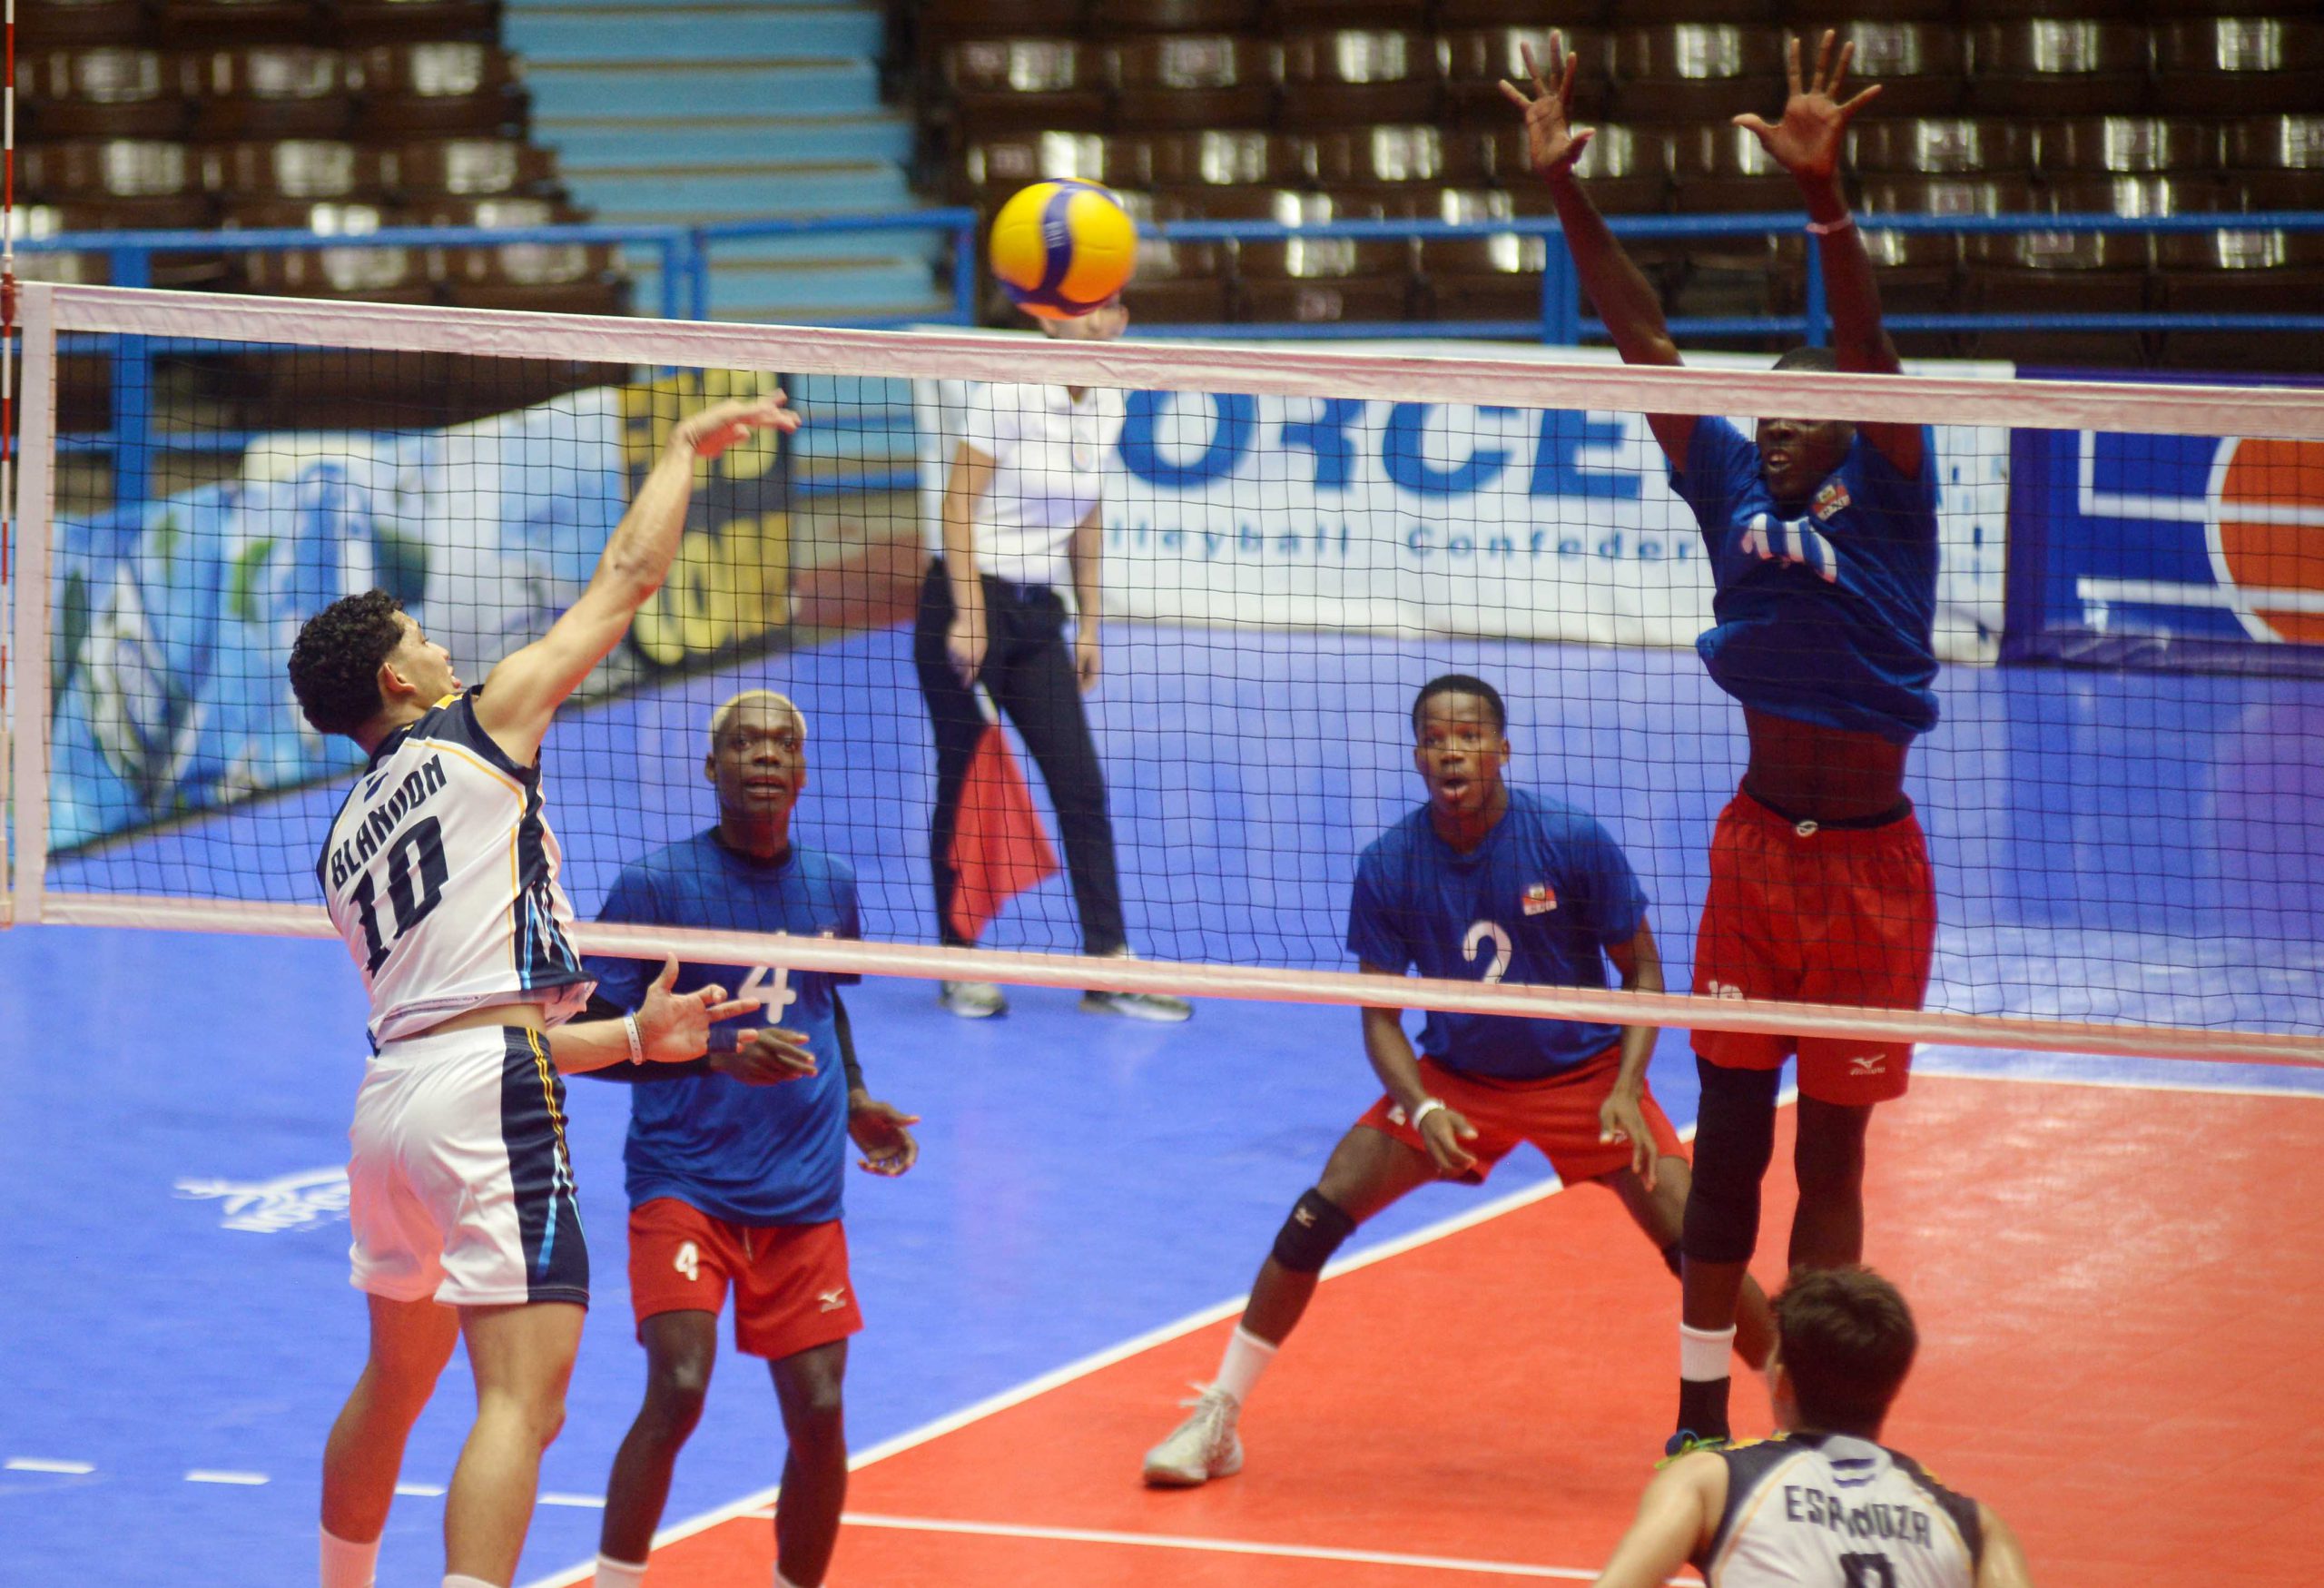 Haiti on this occasion couldn’t against Nicaragua at the U21 Pan American Cup in Havana